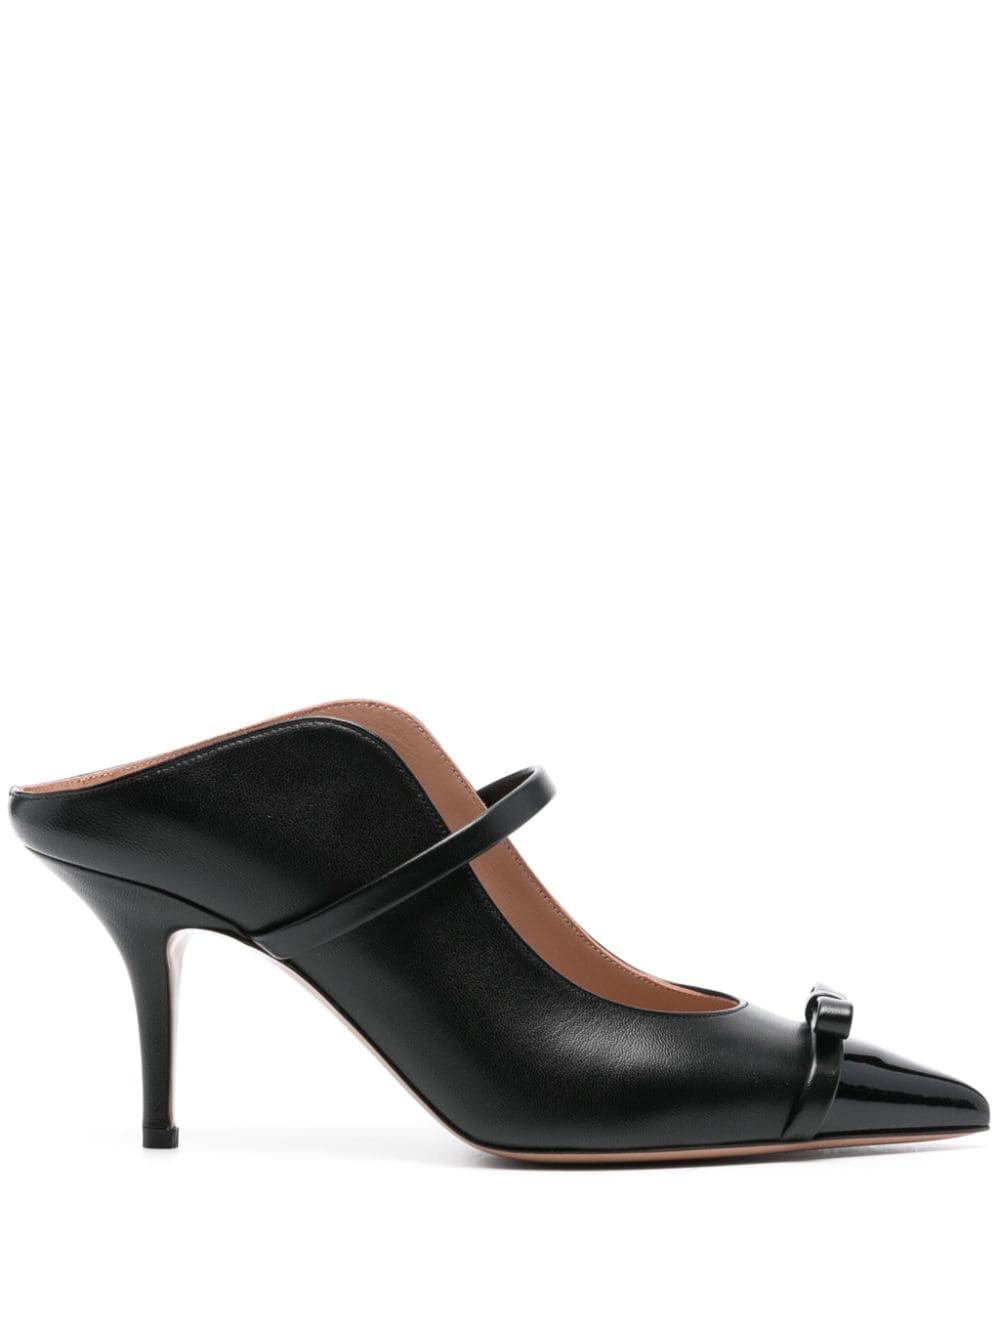 Malone Souliers Blanca 70mm leather mules - Black von Malone Souliers